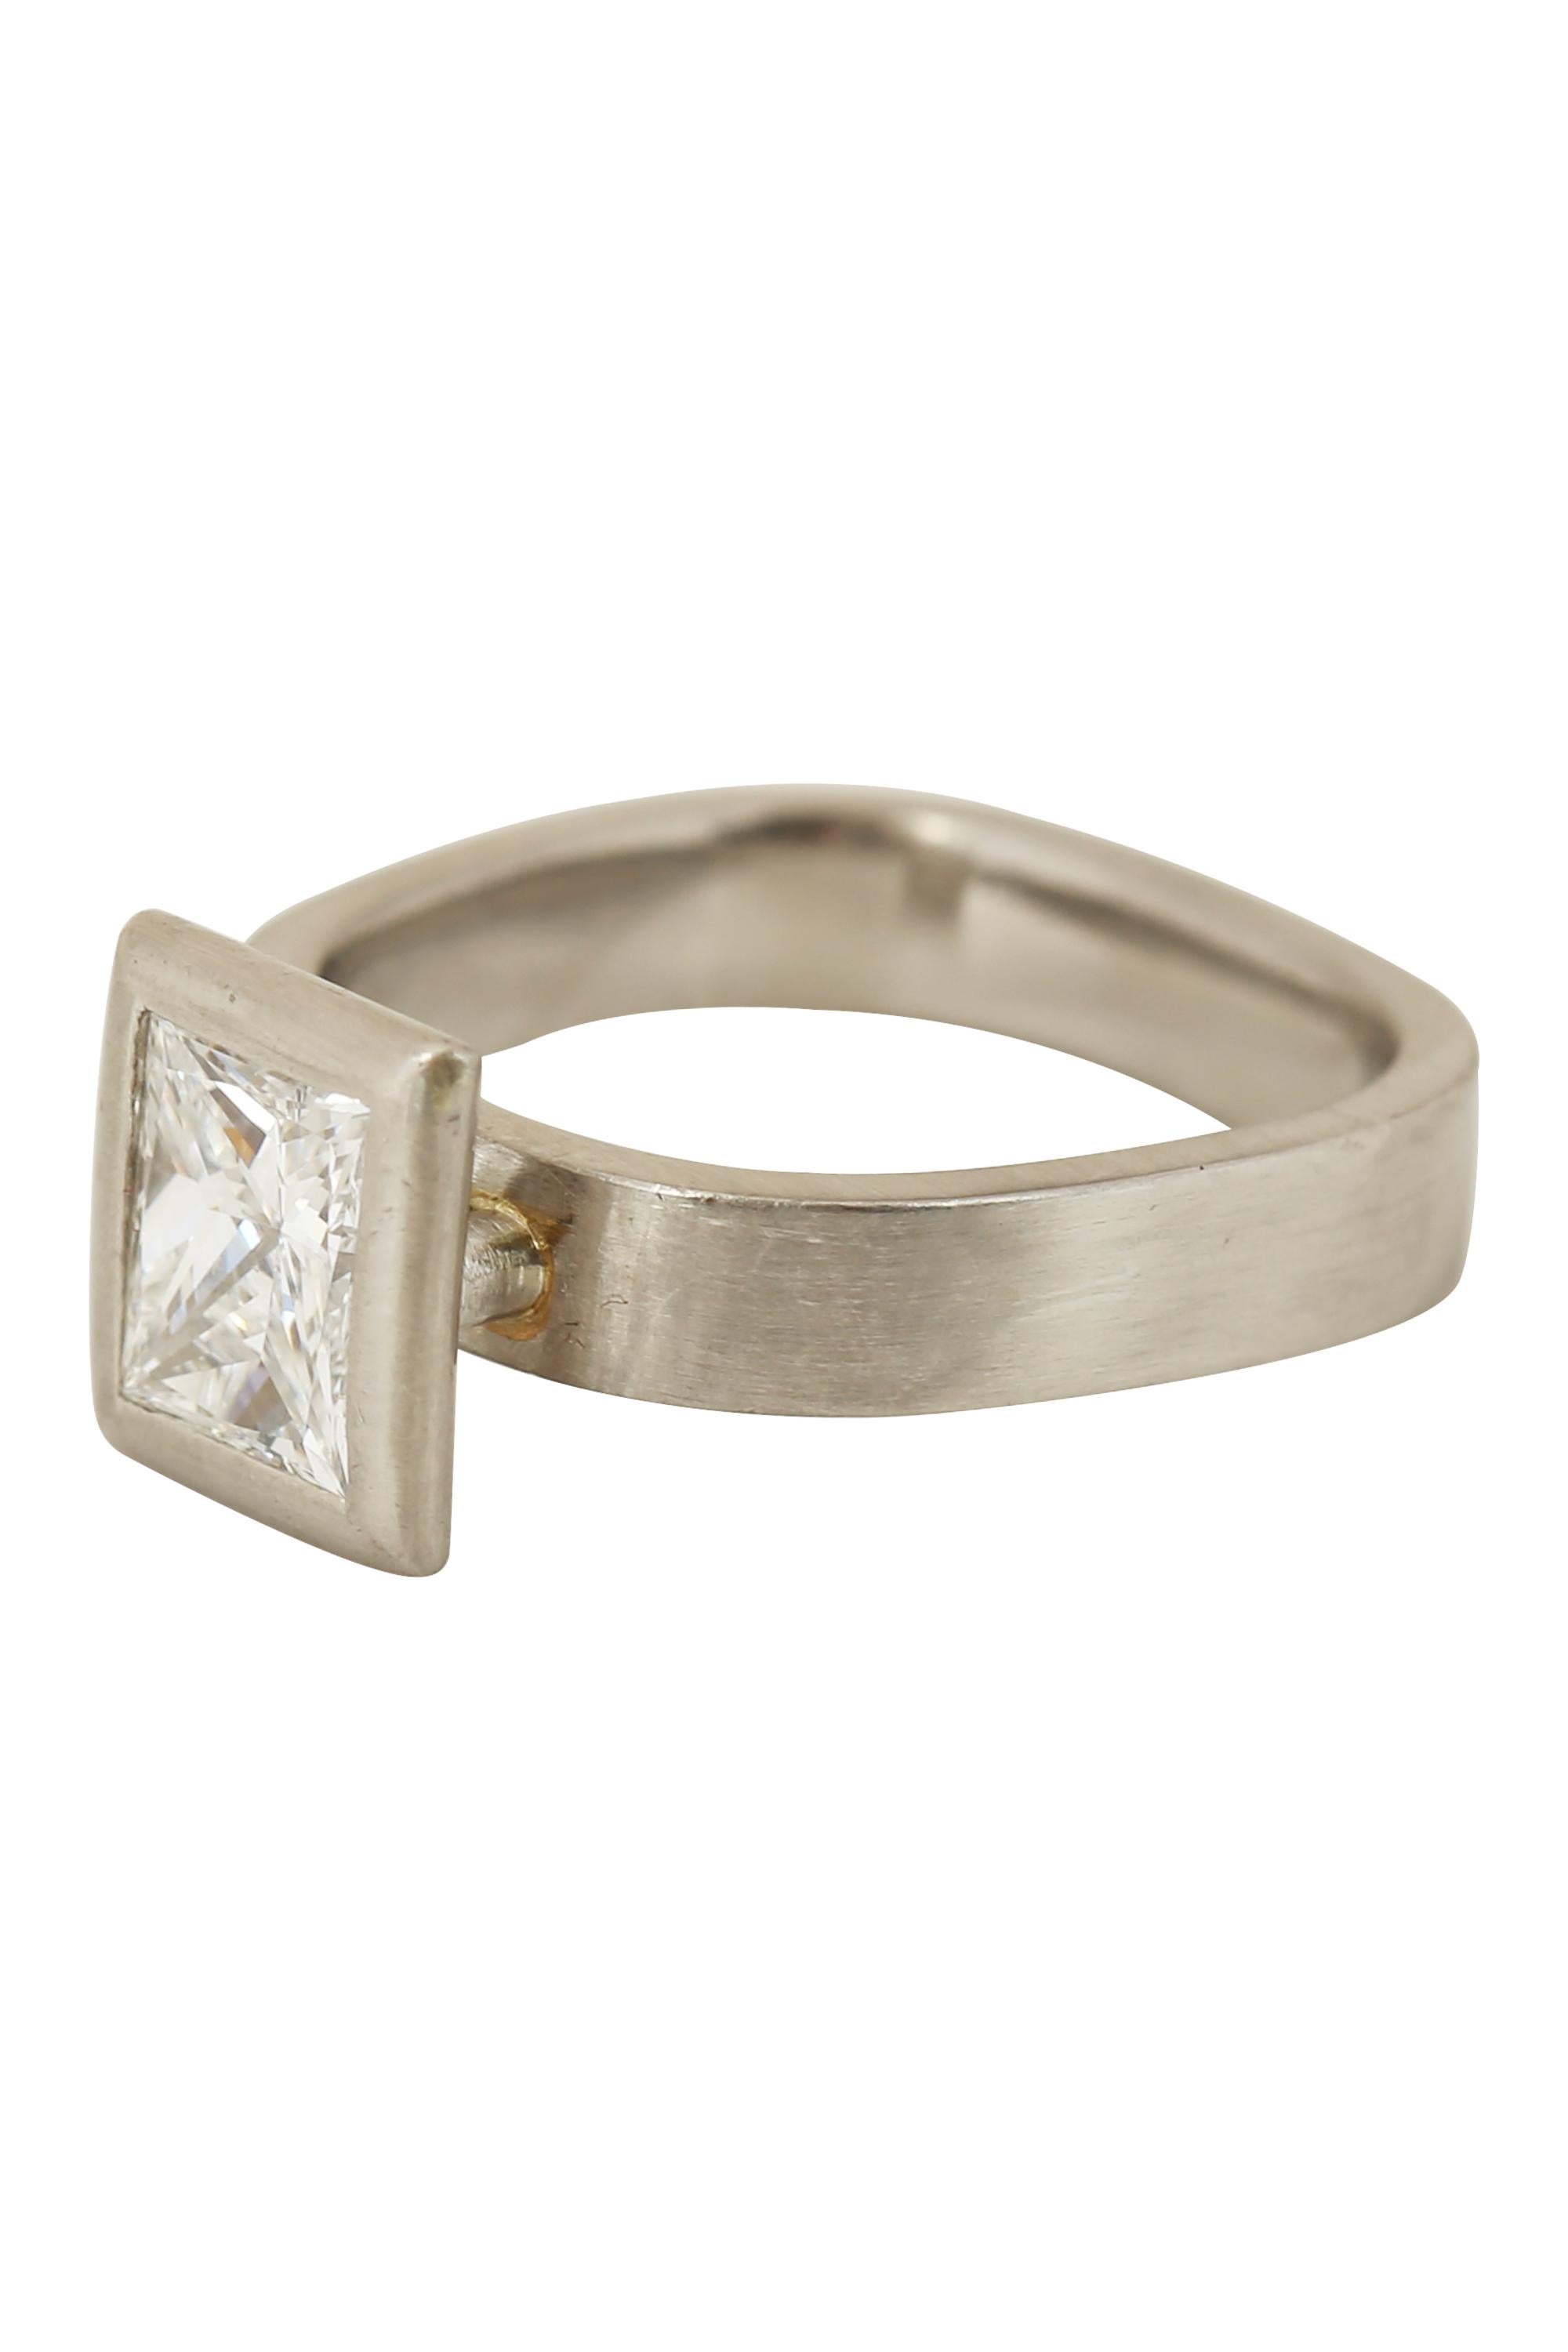 A 0.95 carat princess cut diamond with G color and VS1 clarity radiates from within a modern framing of brushed platinum surmounting a modern geometric ring. Currently Size 4. 

